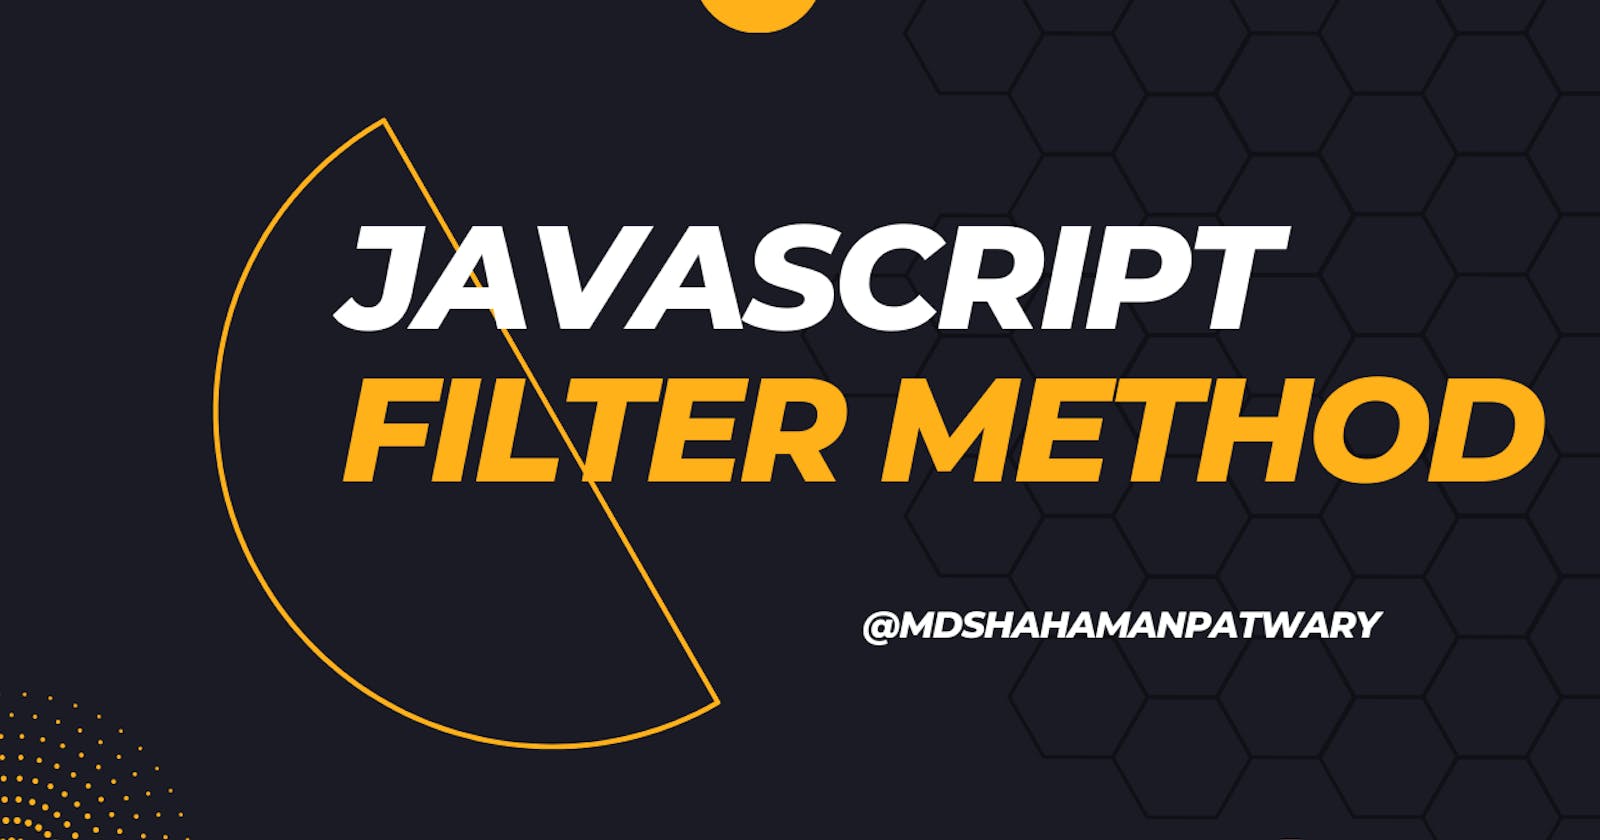 How the JavaScript Filter Method Works – Explained with Code Examples